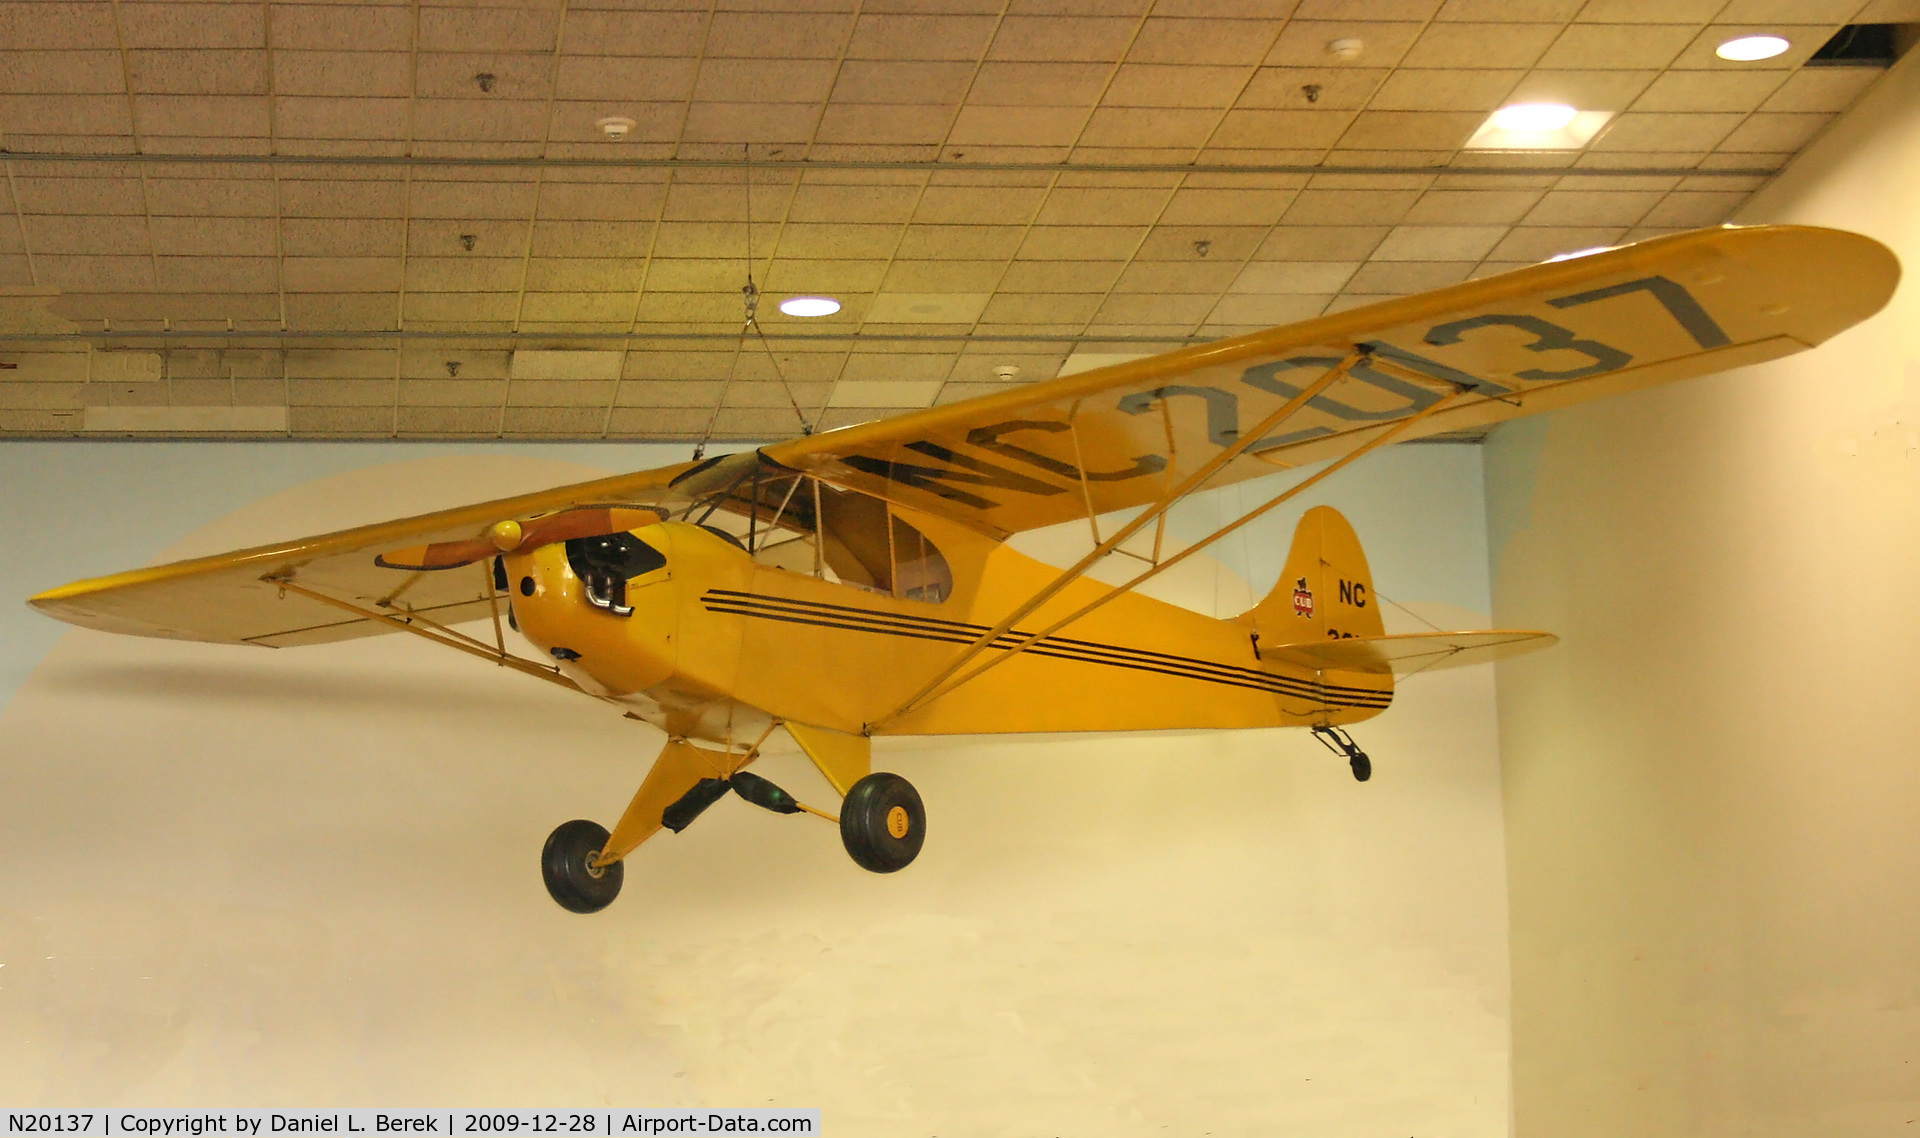 N20137, Piper J-2 C/N 1937, An early Cub on display at the Smithsonian National Air & Space Museum, Washington, DC.